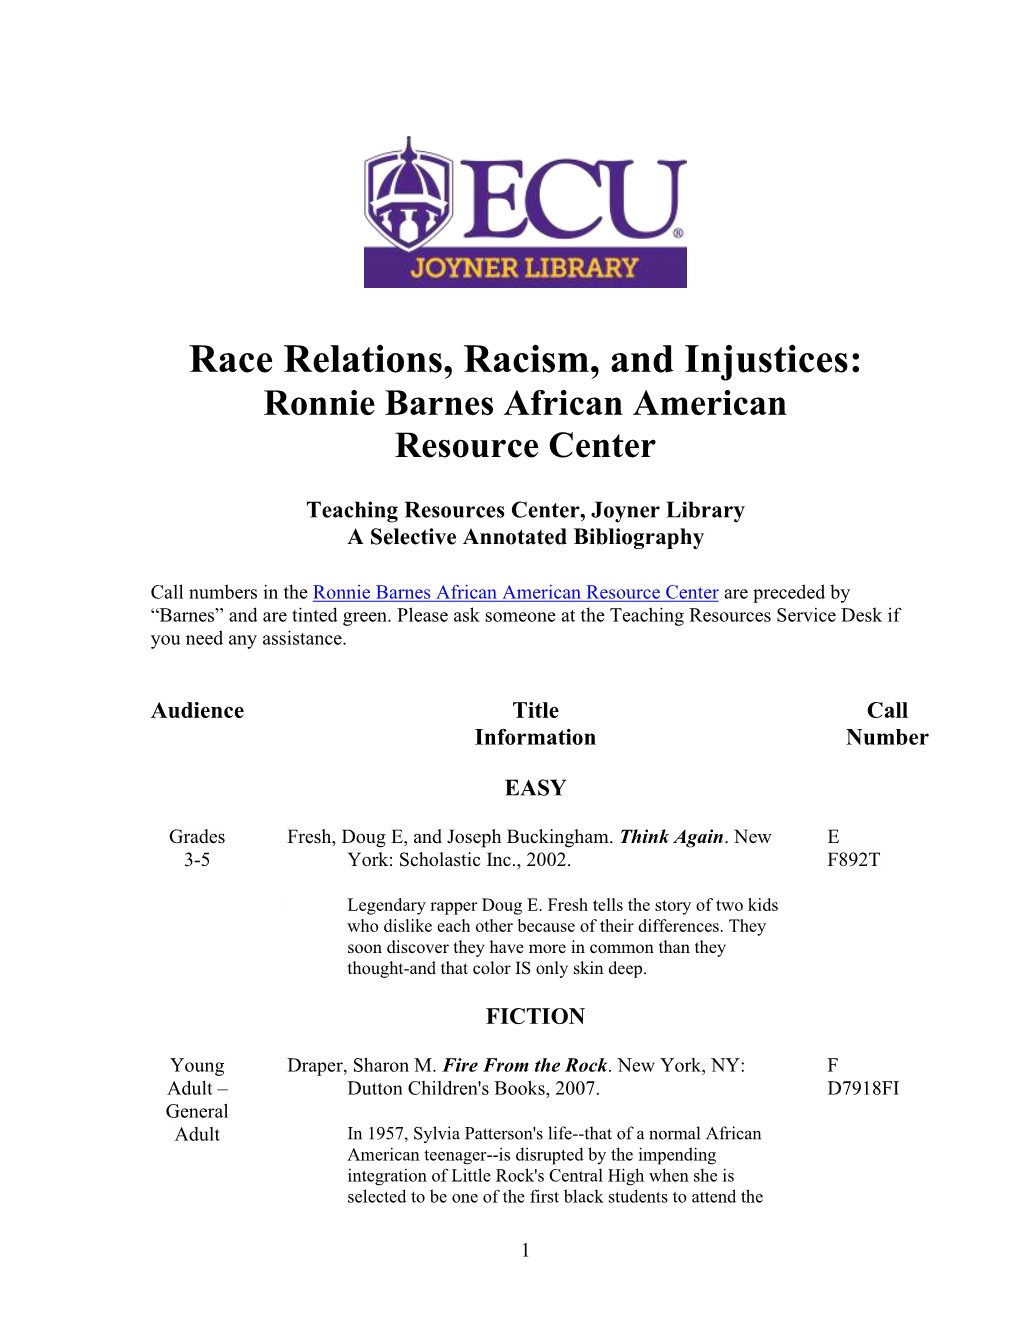 Race Relations, Racism, and Injustices: Ronnie Barnes African American Resource Center